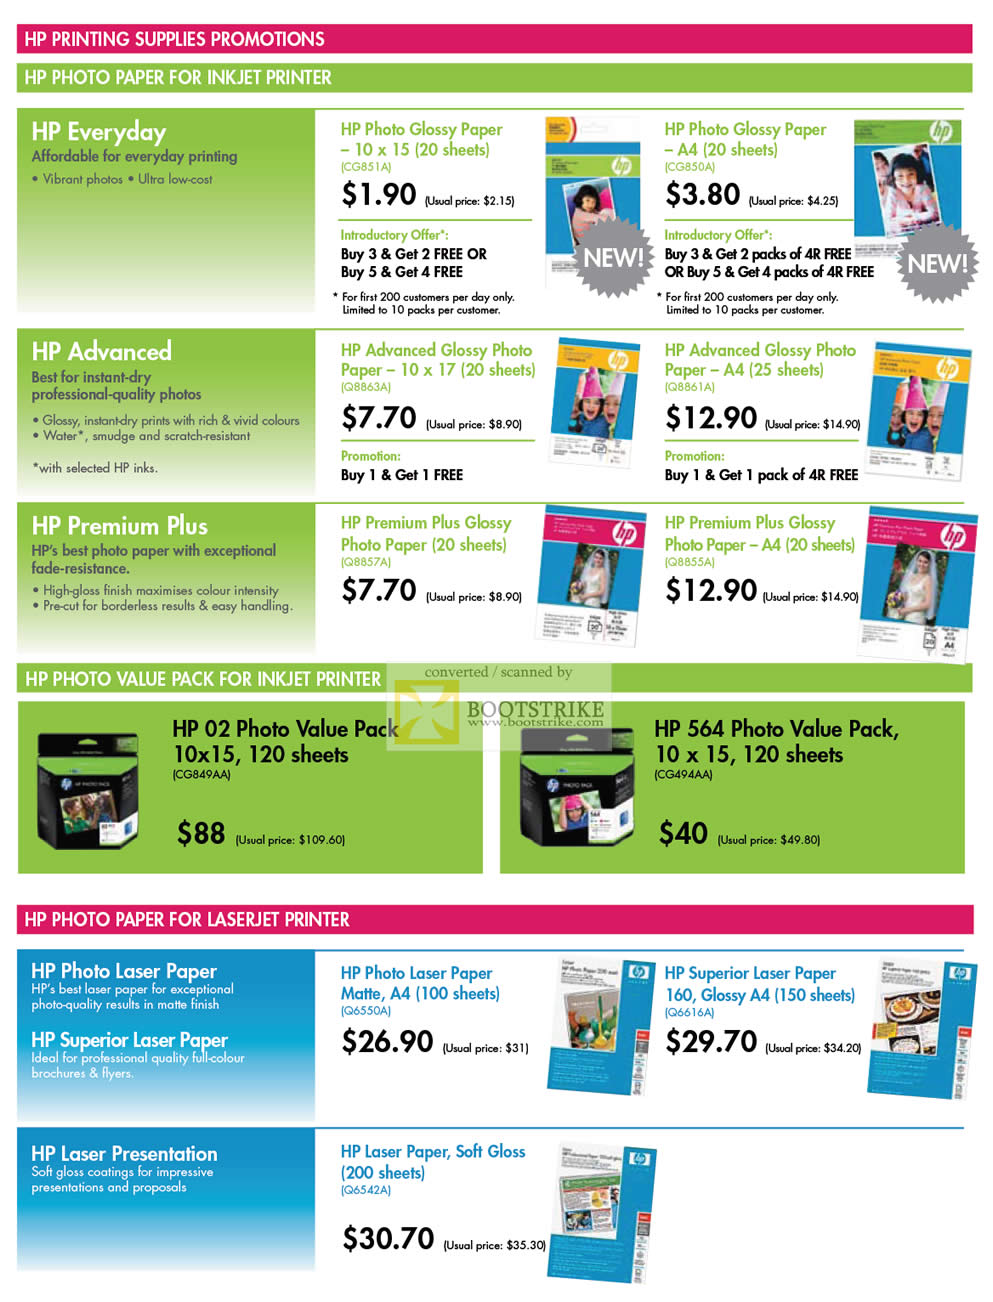 IT Show 2010 price list image brochure of HP Printing Supplies Paper Photo Superior Laser